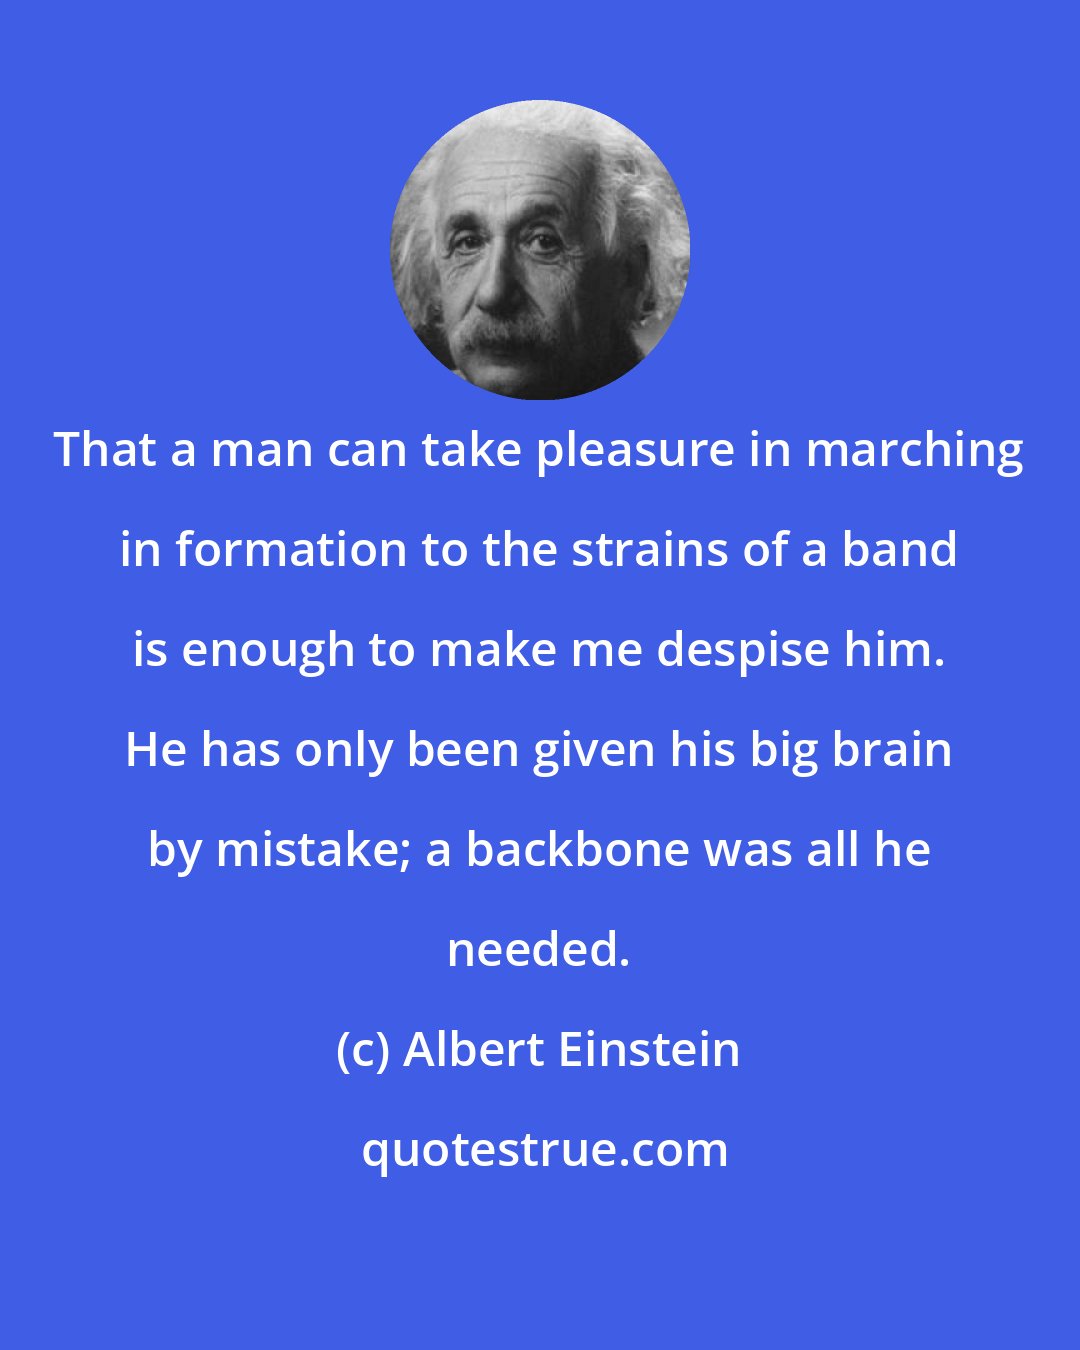 Albert Einstein: That a man can take pleasure in marching in formation to the strains of a band is enough to make me despise him. He has only been given his big brain by mistake; a backbone was all he needed.